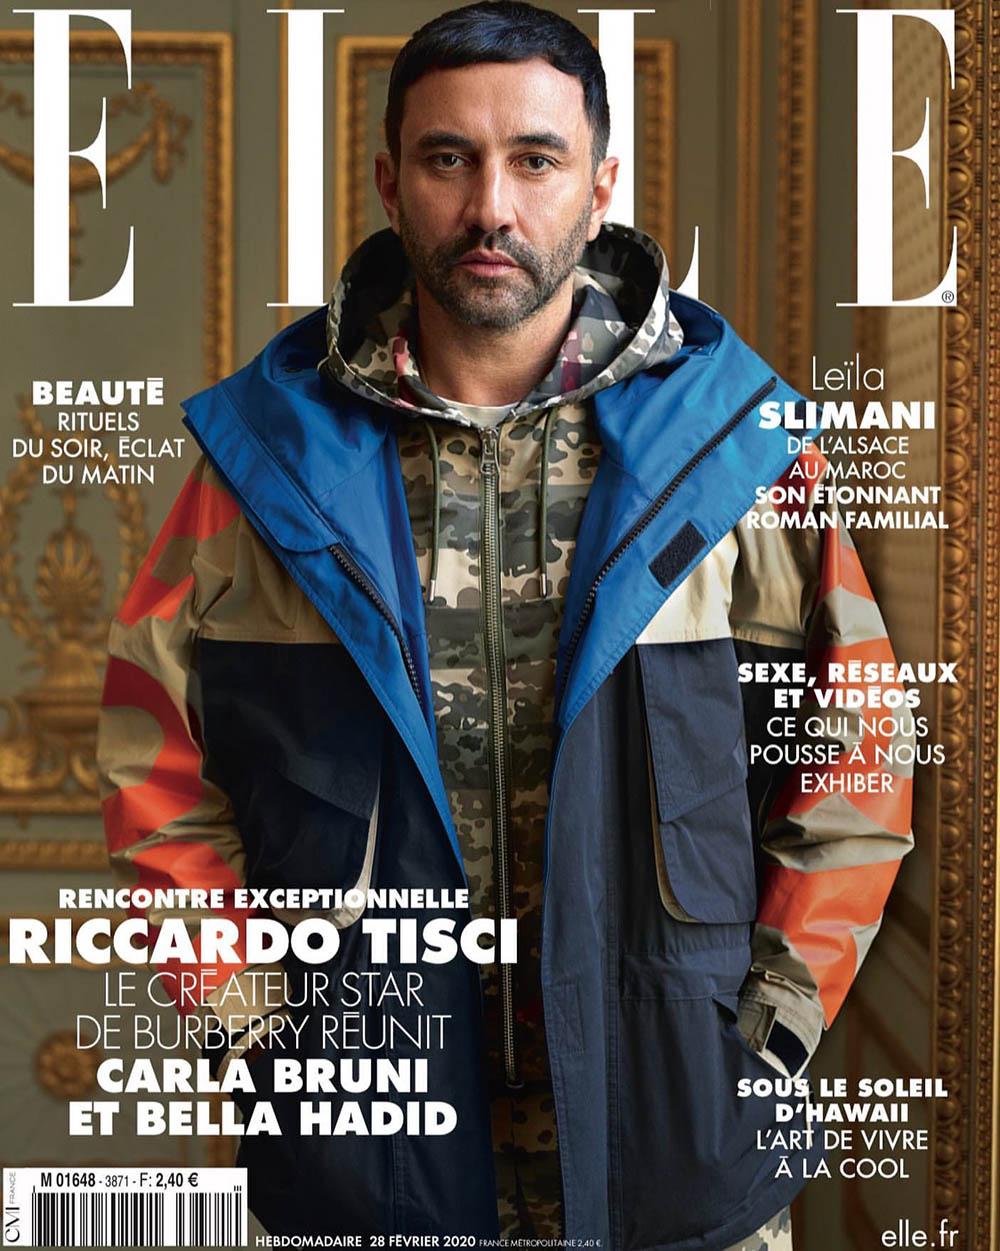 Riccardo Tisci, Carla Bruni and Bella Hadid cover Elle France February 28th, 2020 by Mark Seliger